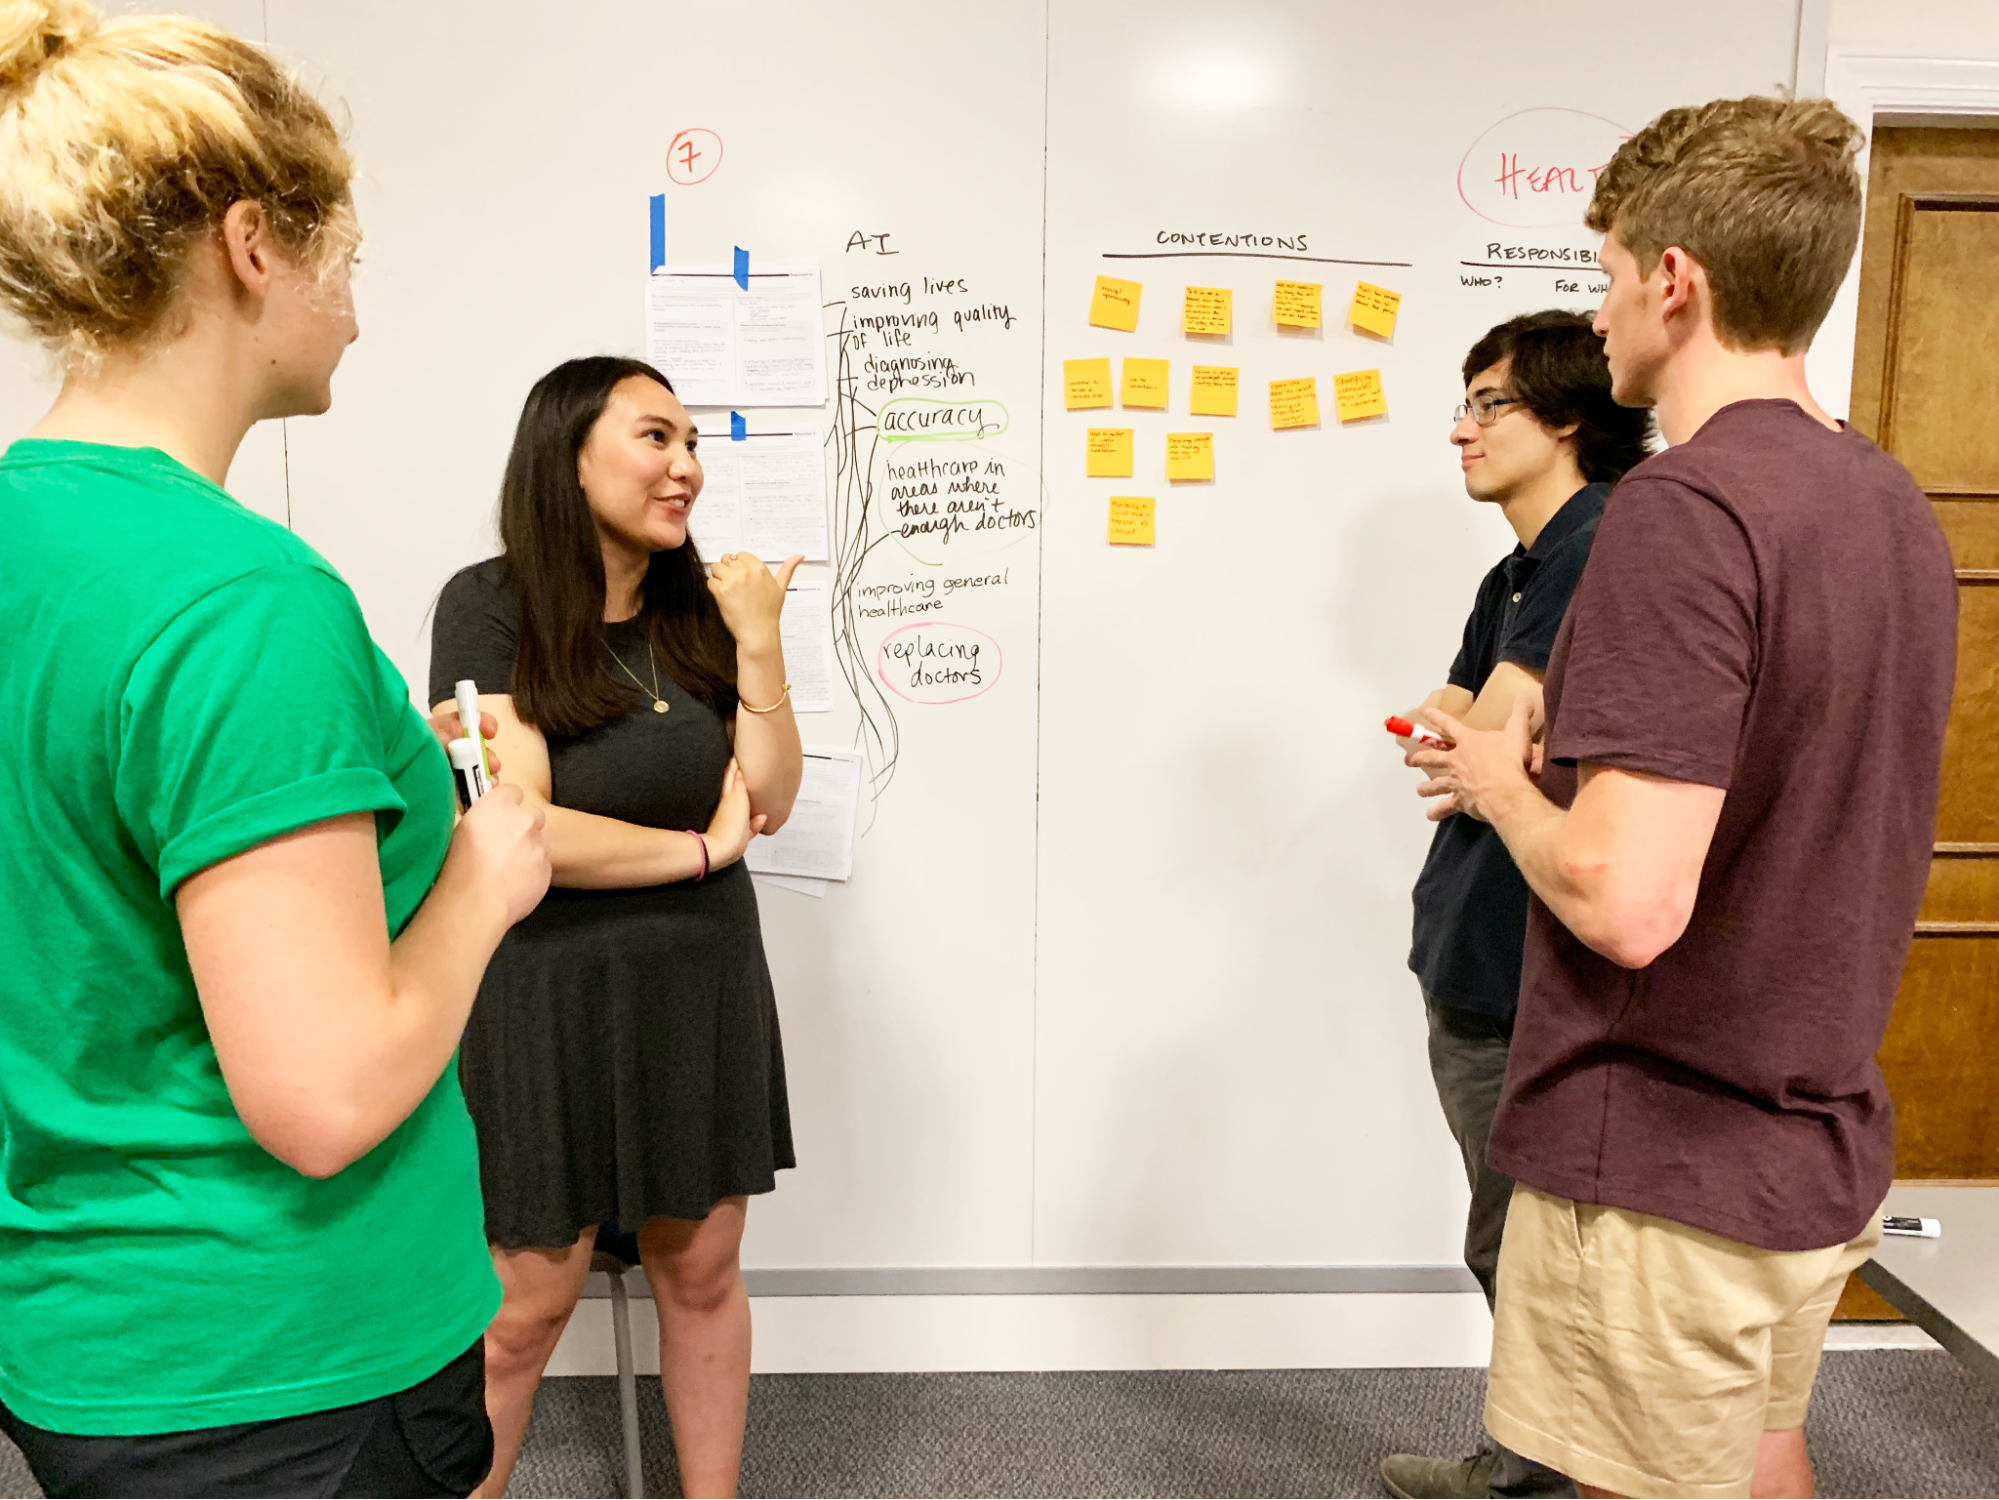 Students in the Fall 2019 Introduction to AI course use a white board and sticky notes in an interactive exercise.